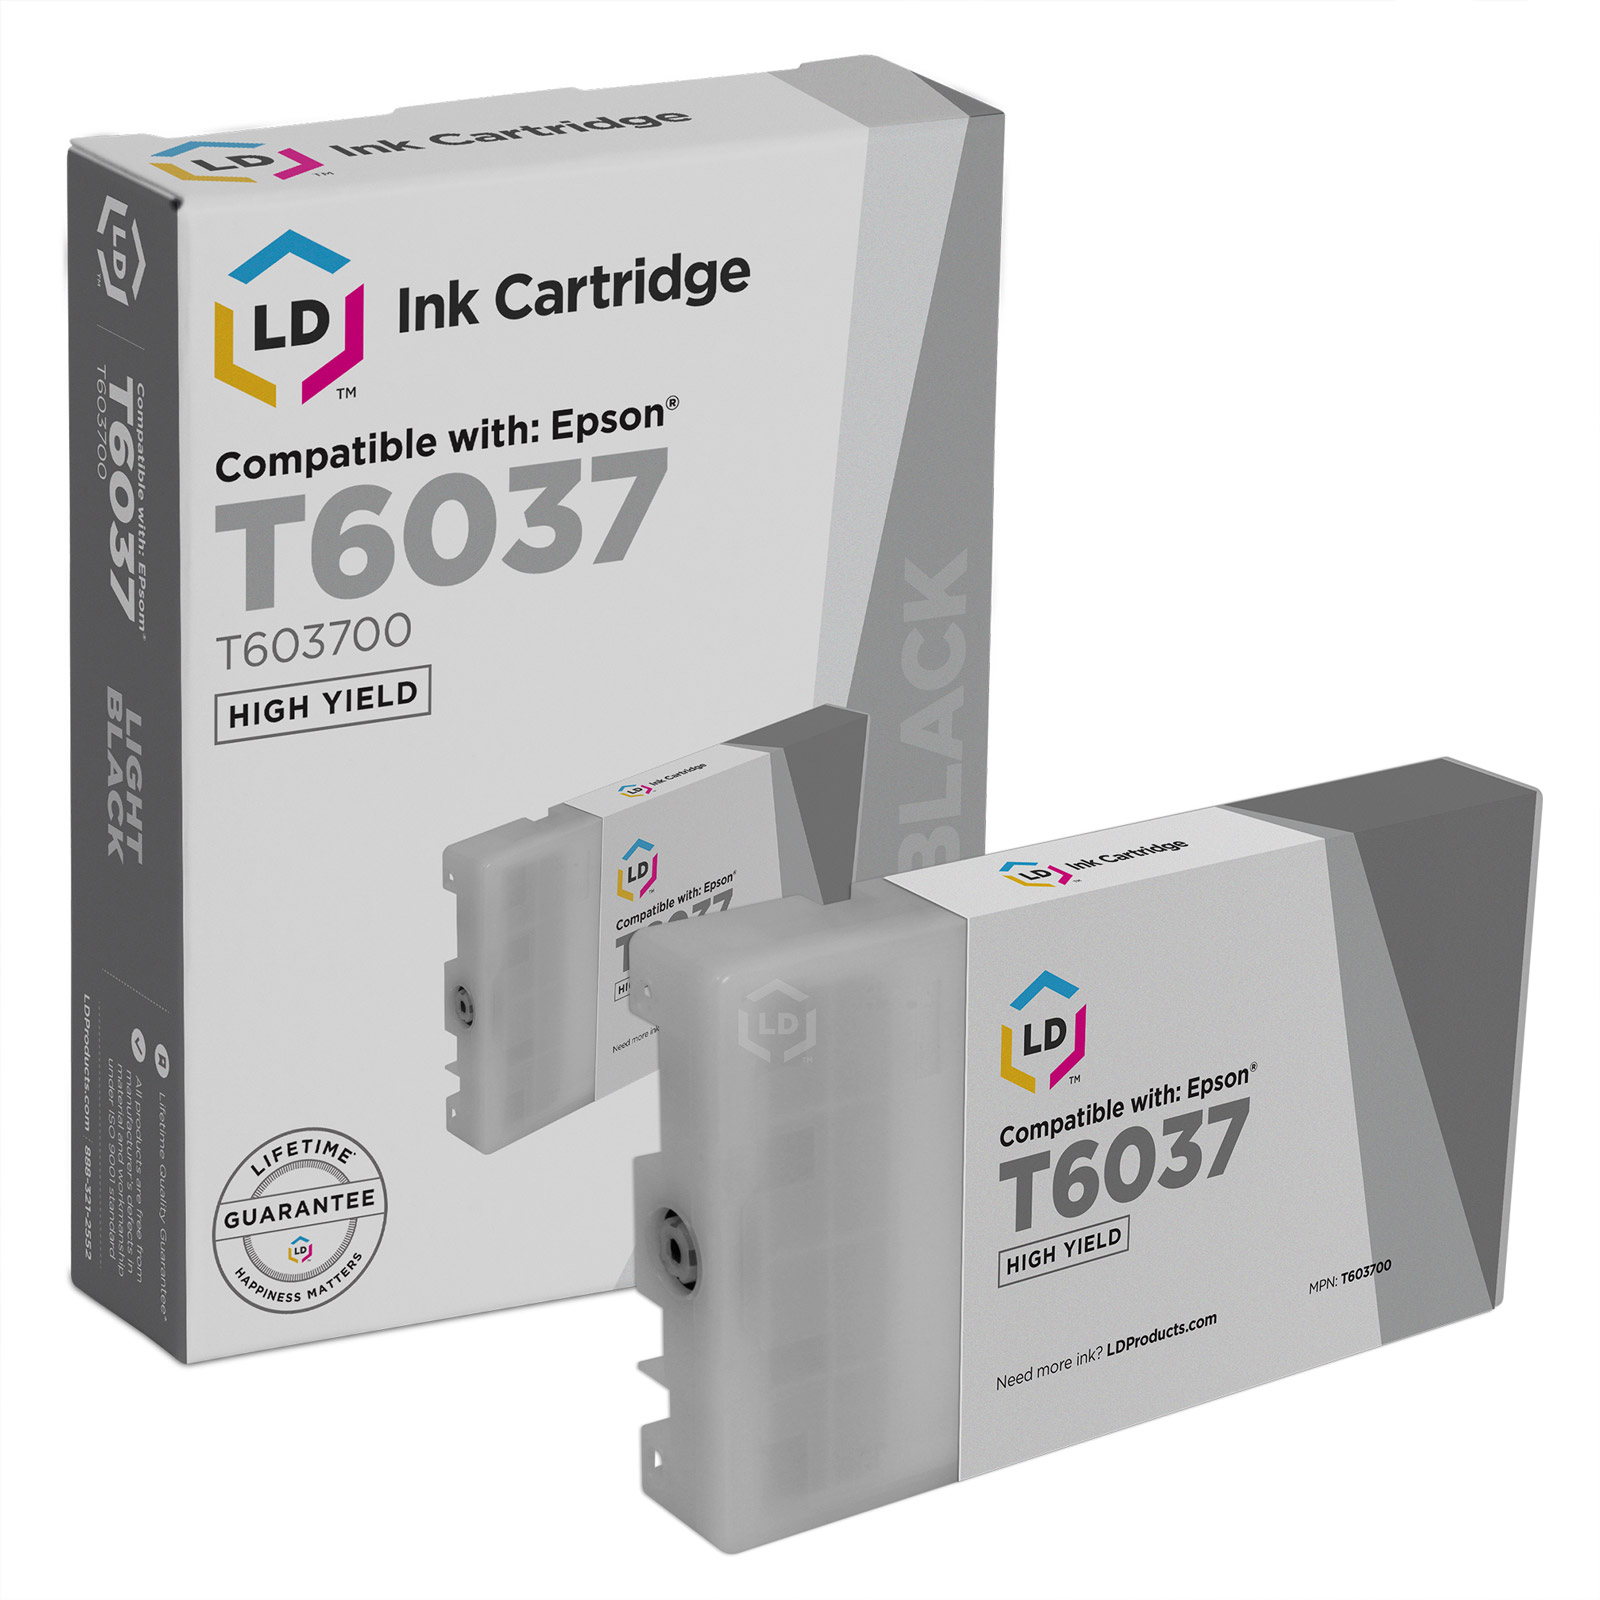 LD Remanufactured Cartridge Replacement for Epson T603700 High Capacity (Light Black) - image 1 of 1